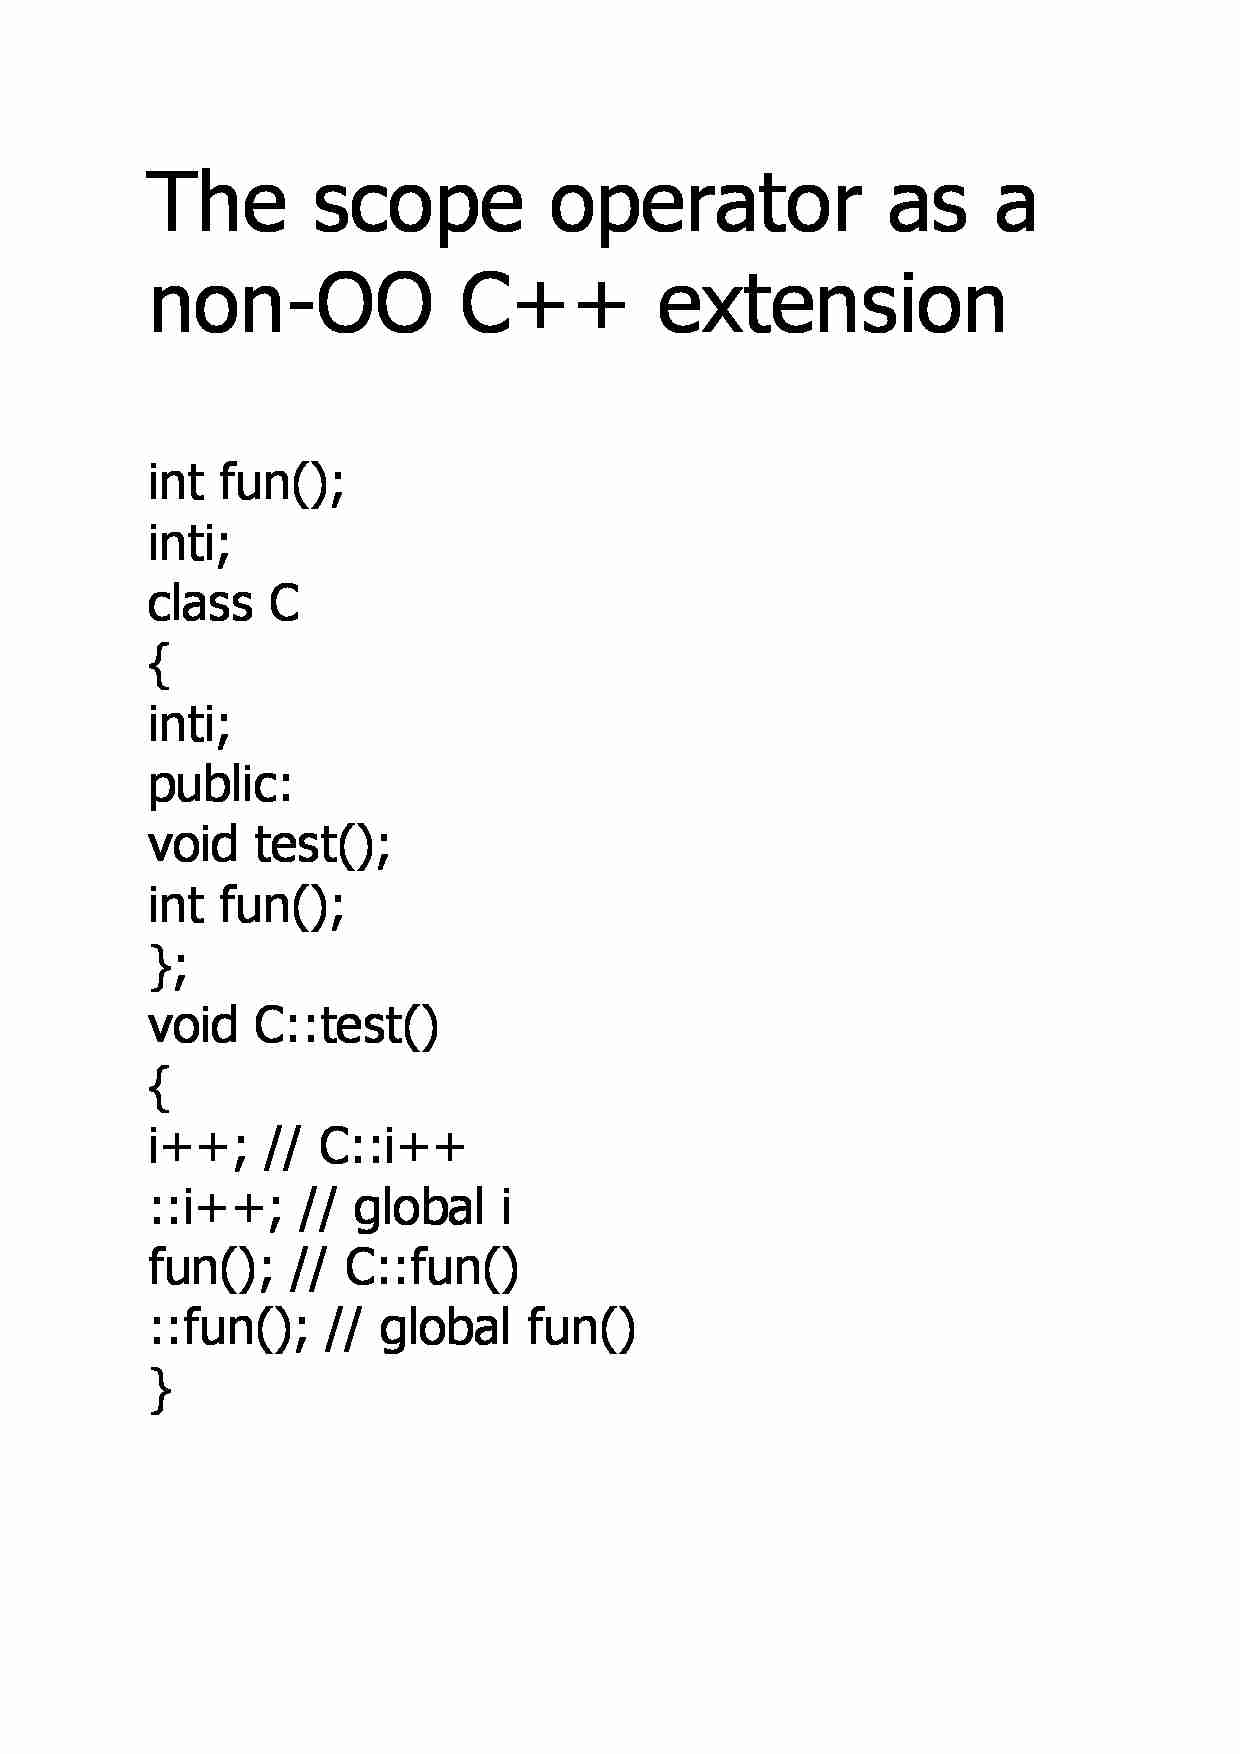 The scope operator as a non-OO C++ extension - strona 1